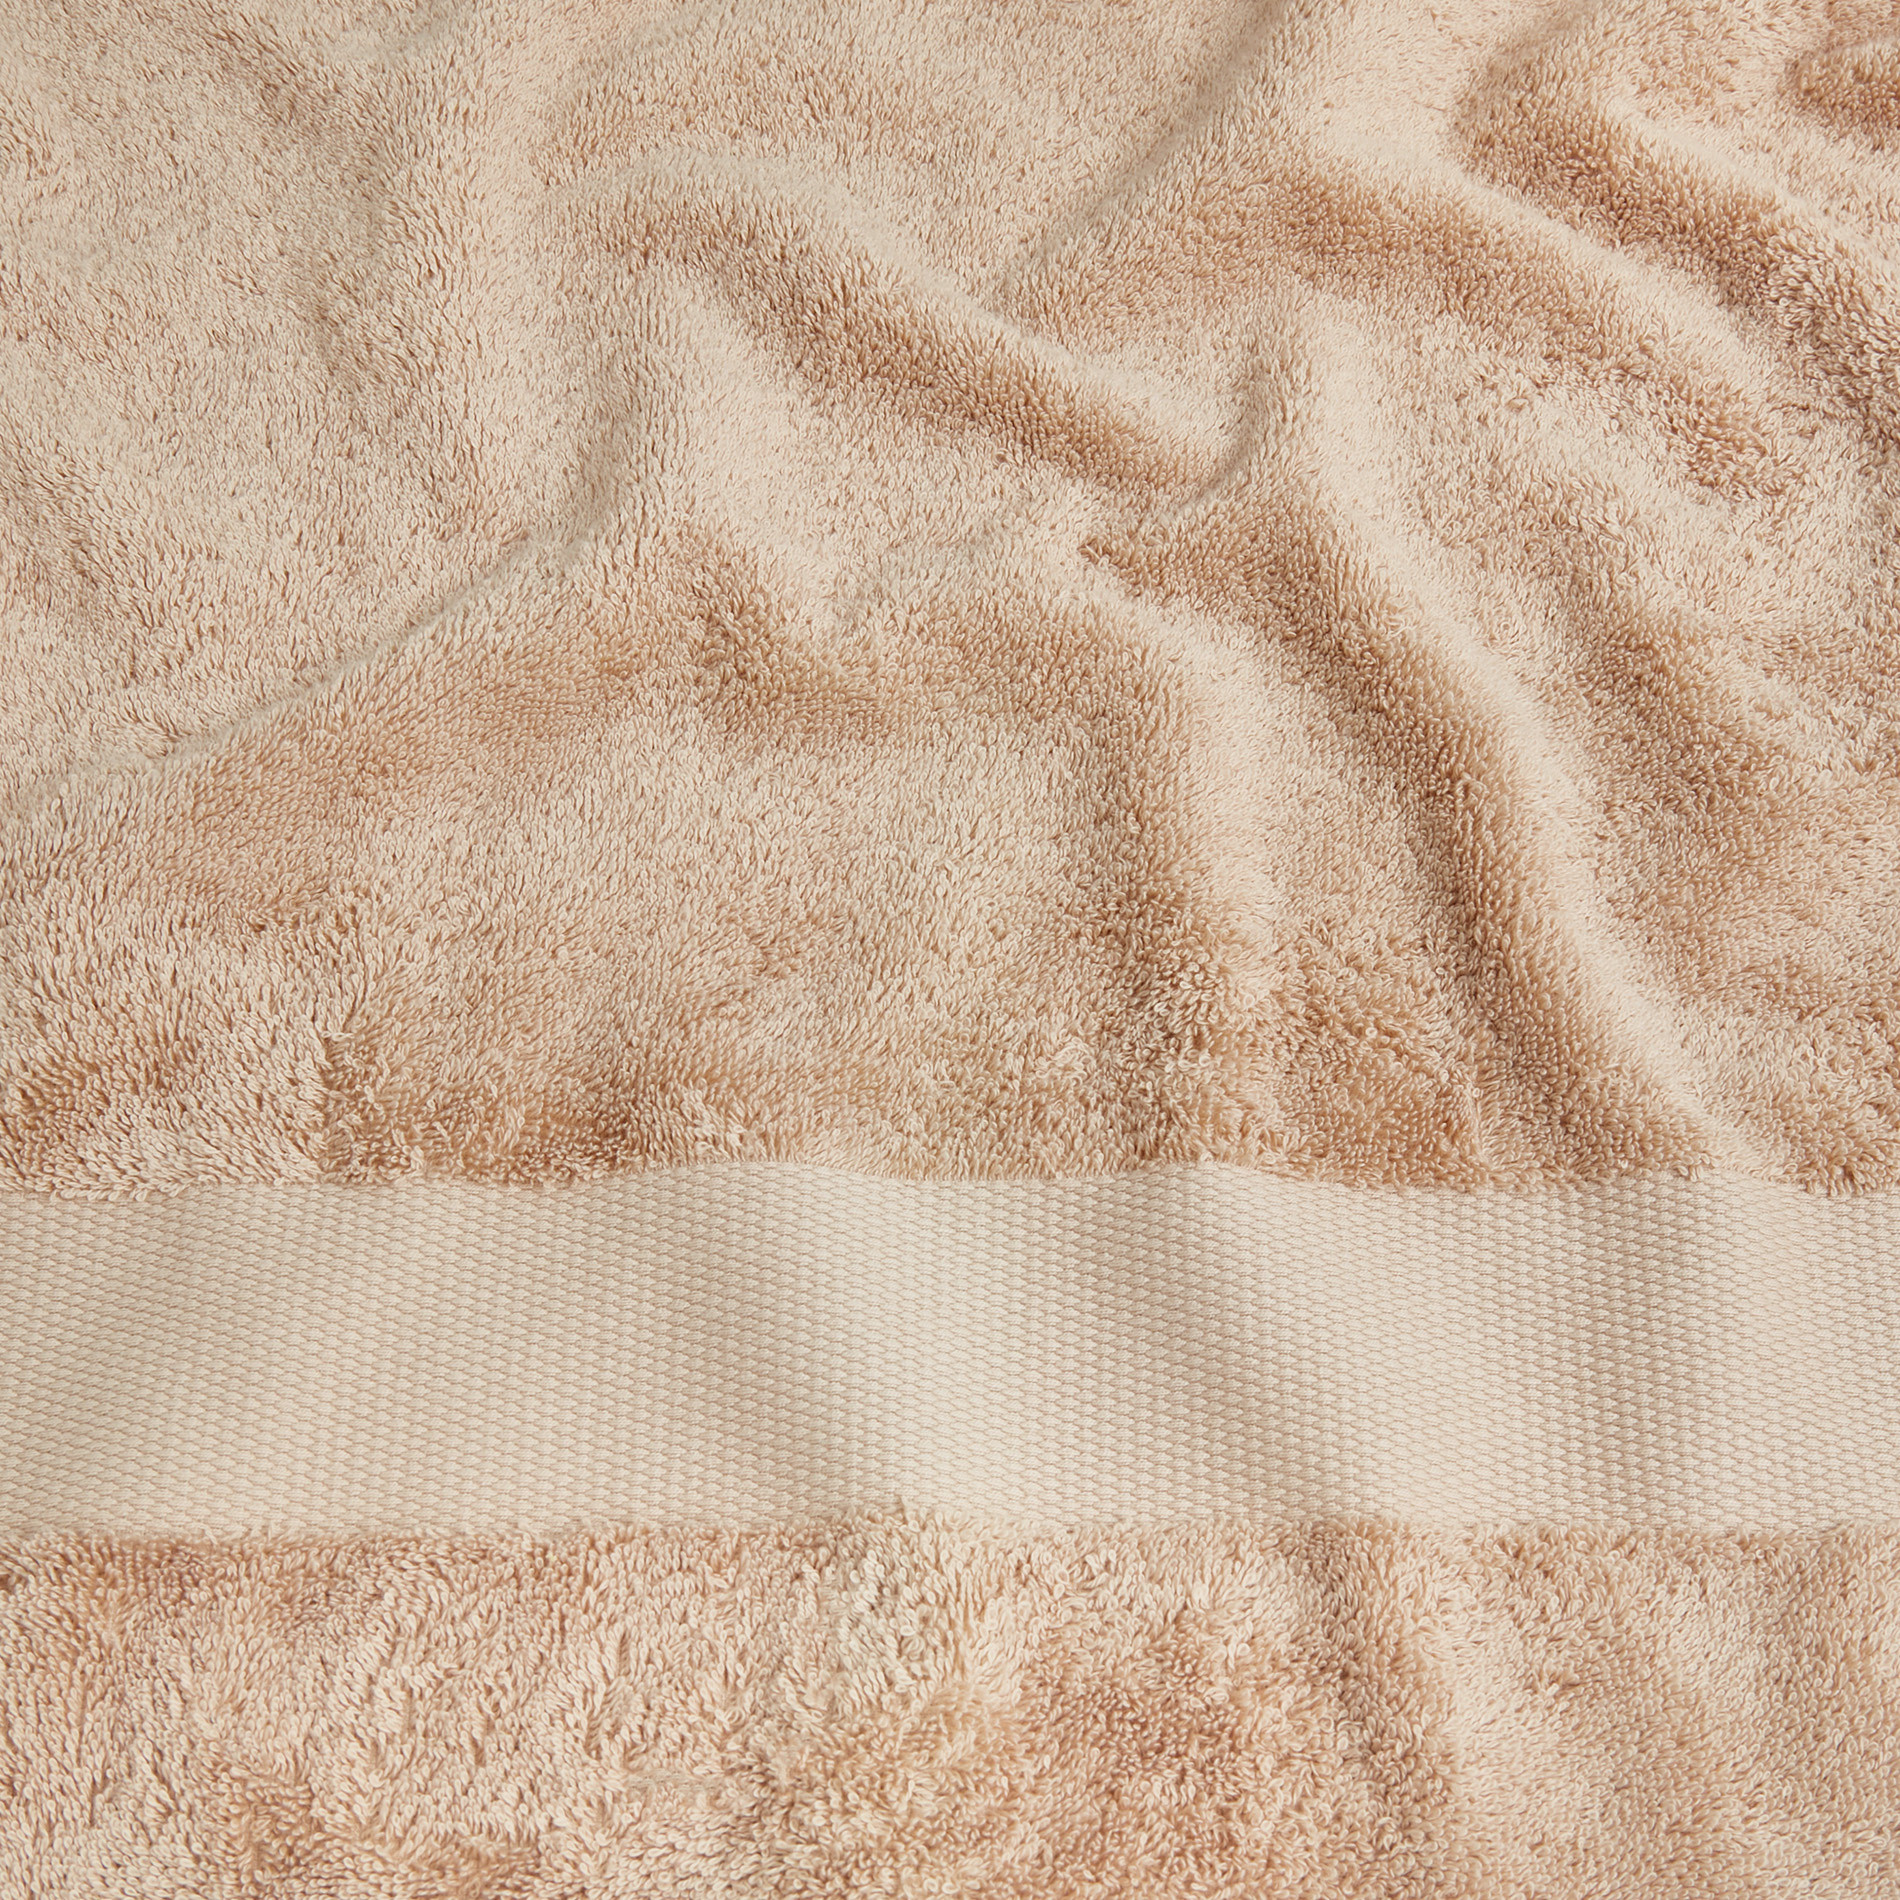 Zefiro pure cotton terry towel, Hazelnut Brown, large image number 3